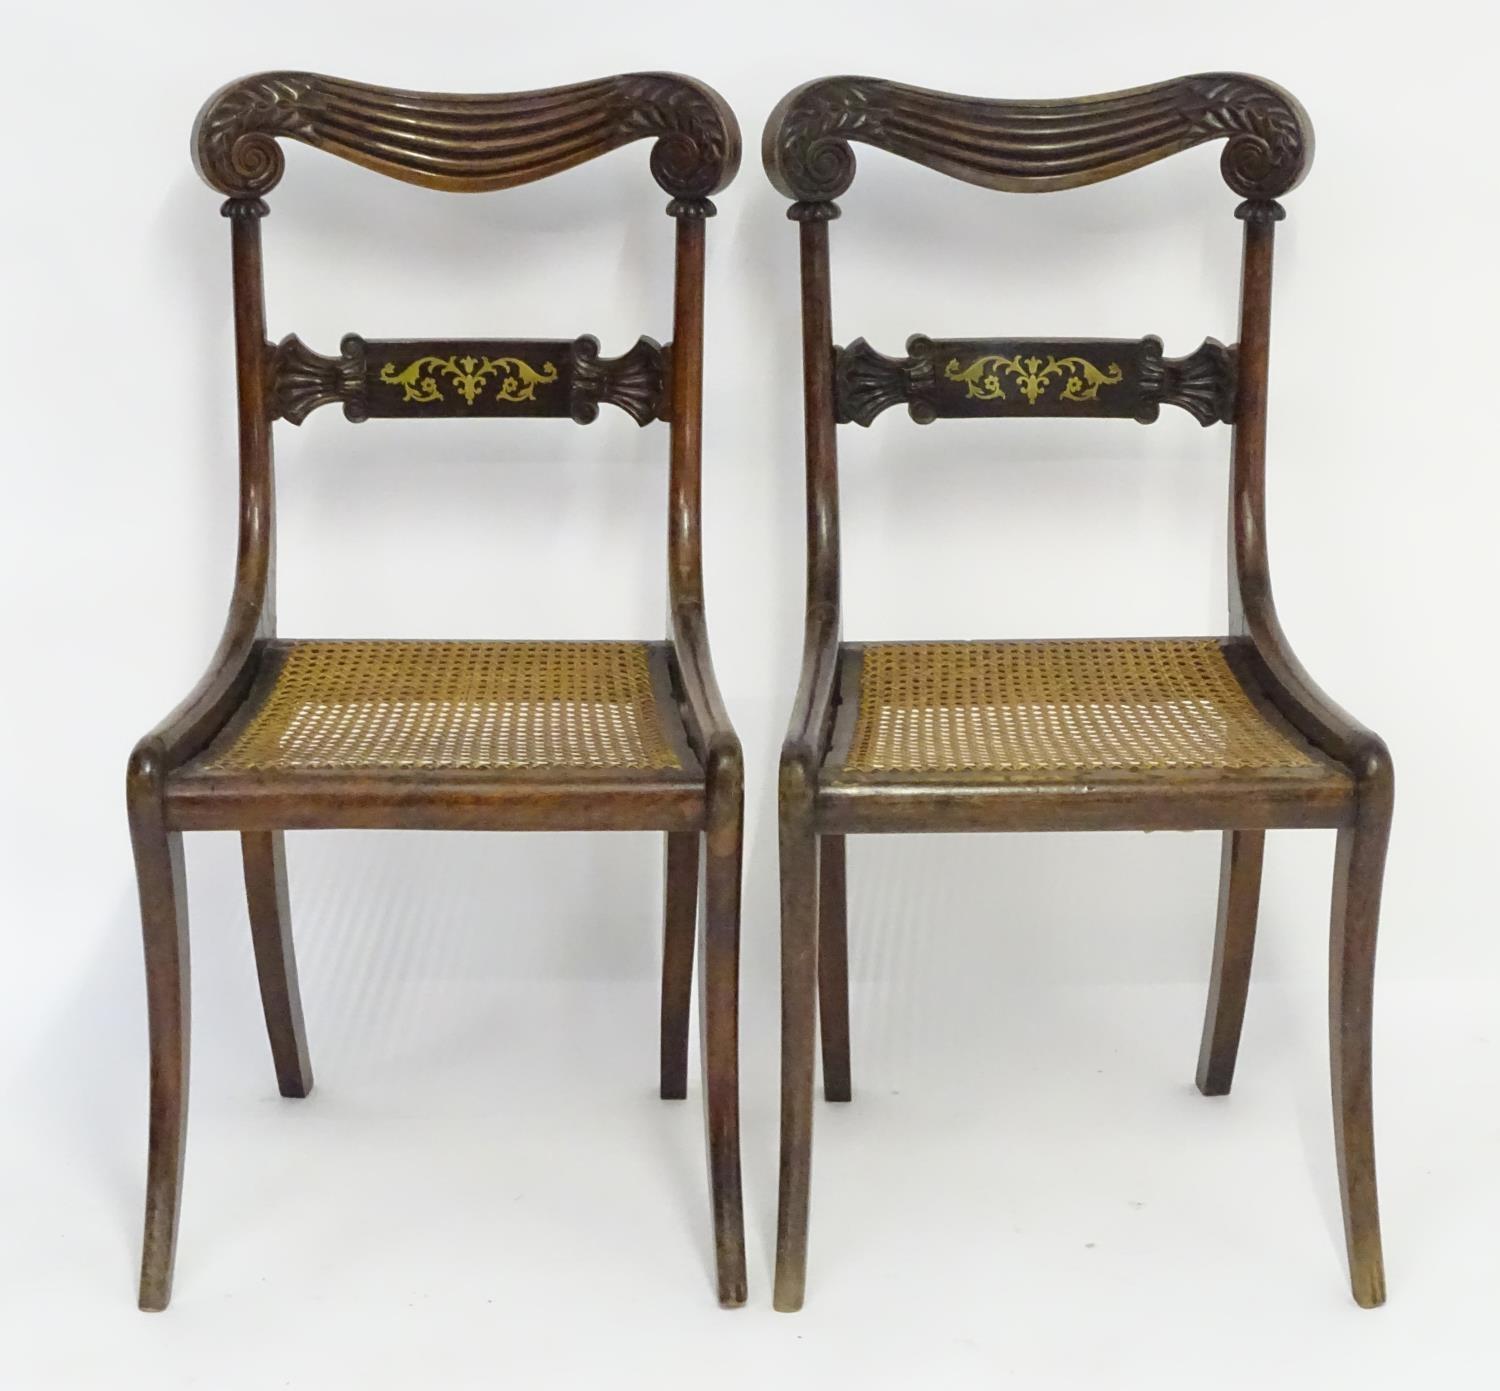 A pair of mahogany 19thC chairs with carved scrolled top rails above brass inlayed mid rails and - Image 3 of 7